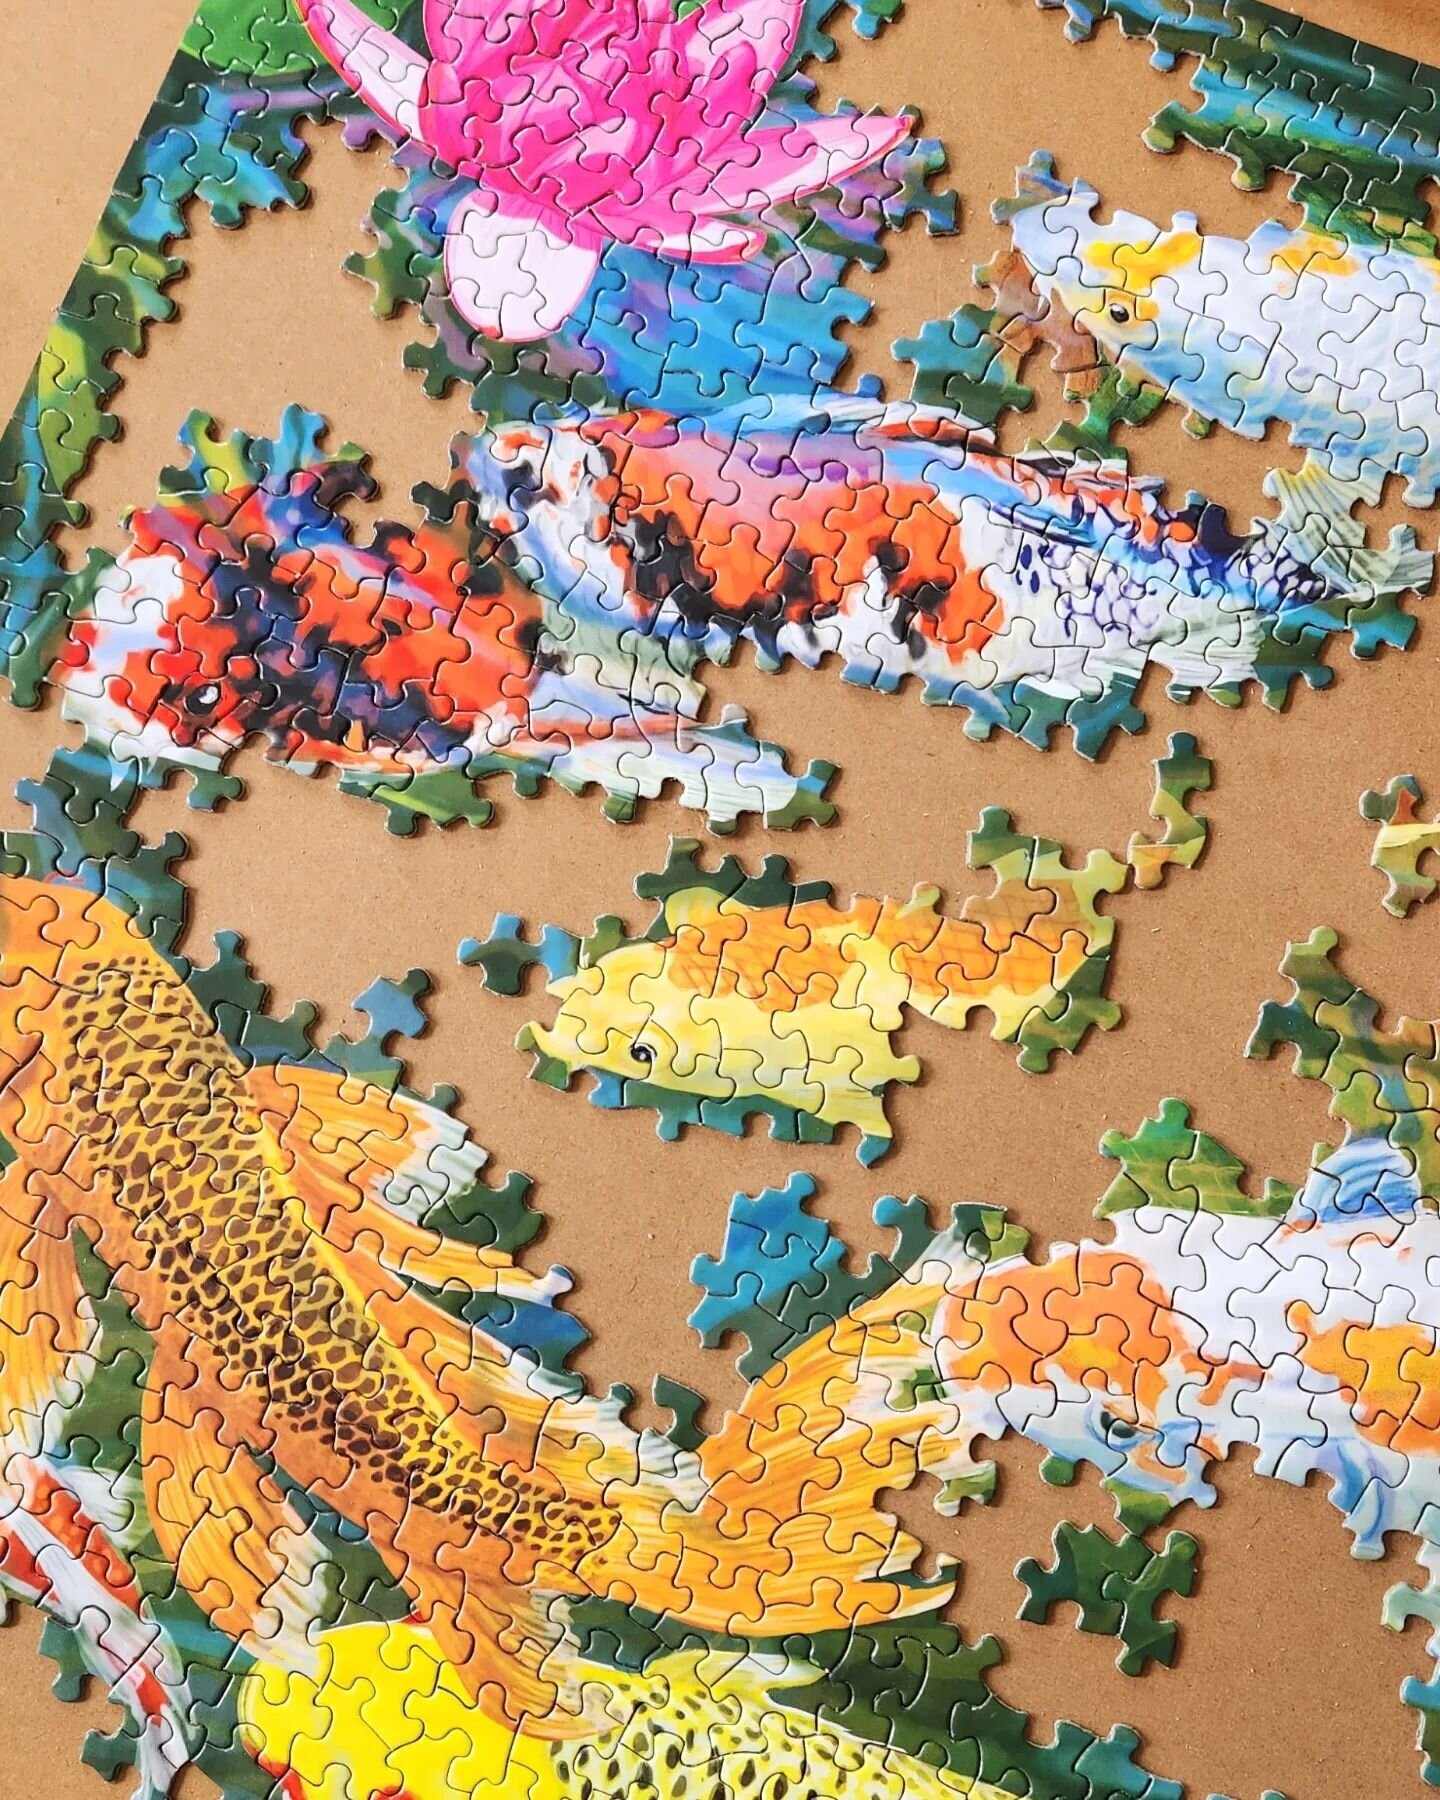 Here is another relaxful &amp; peaceful puzzle from the latest @springbokpuzzles release! 🪷🐟

If you are looking for a little bit of a challenge and a beautiful puzzle, this is a great one. I loved puzzling all the patterns on the koi fish and the 